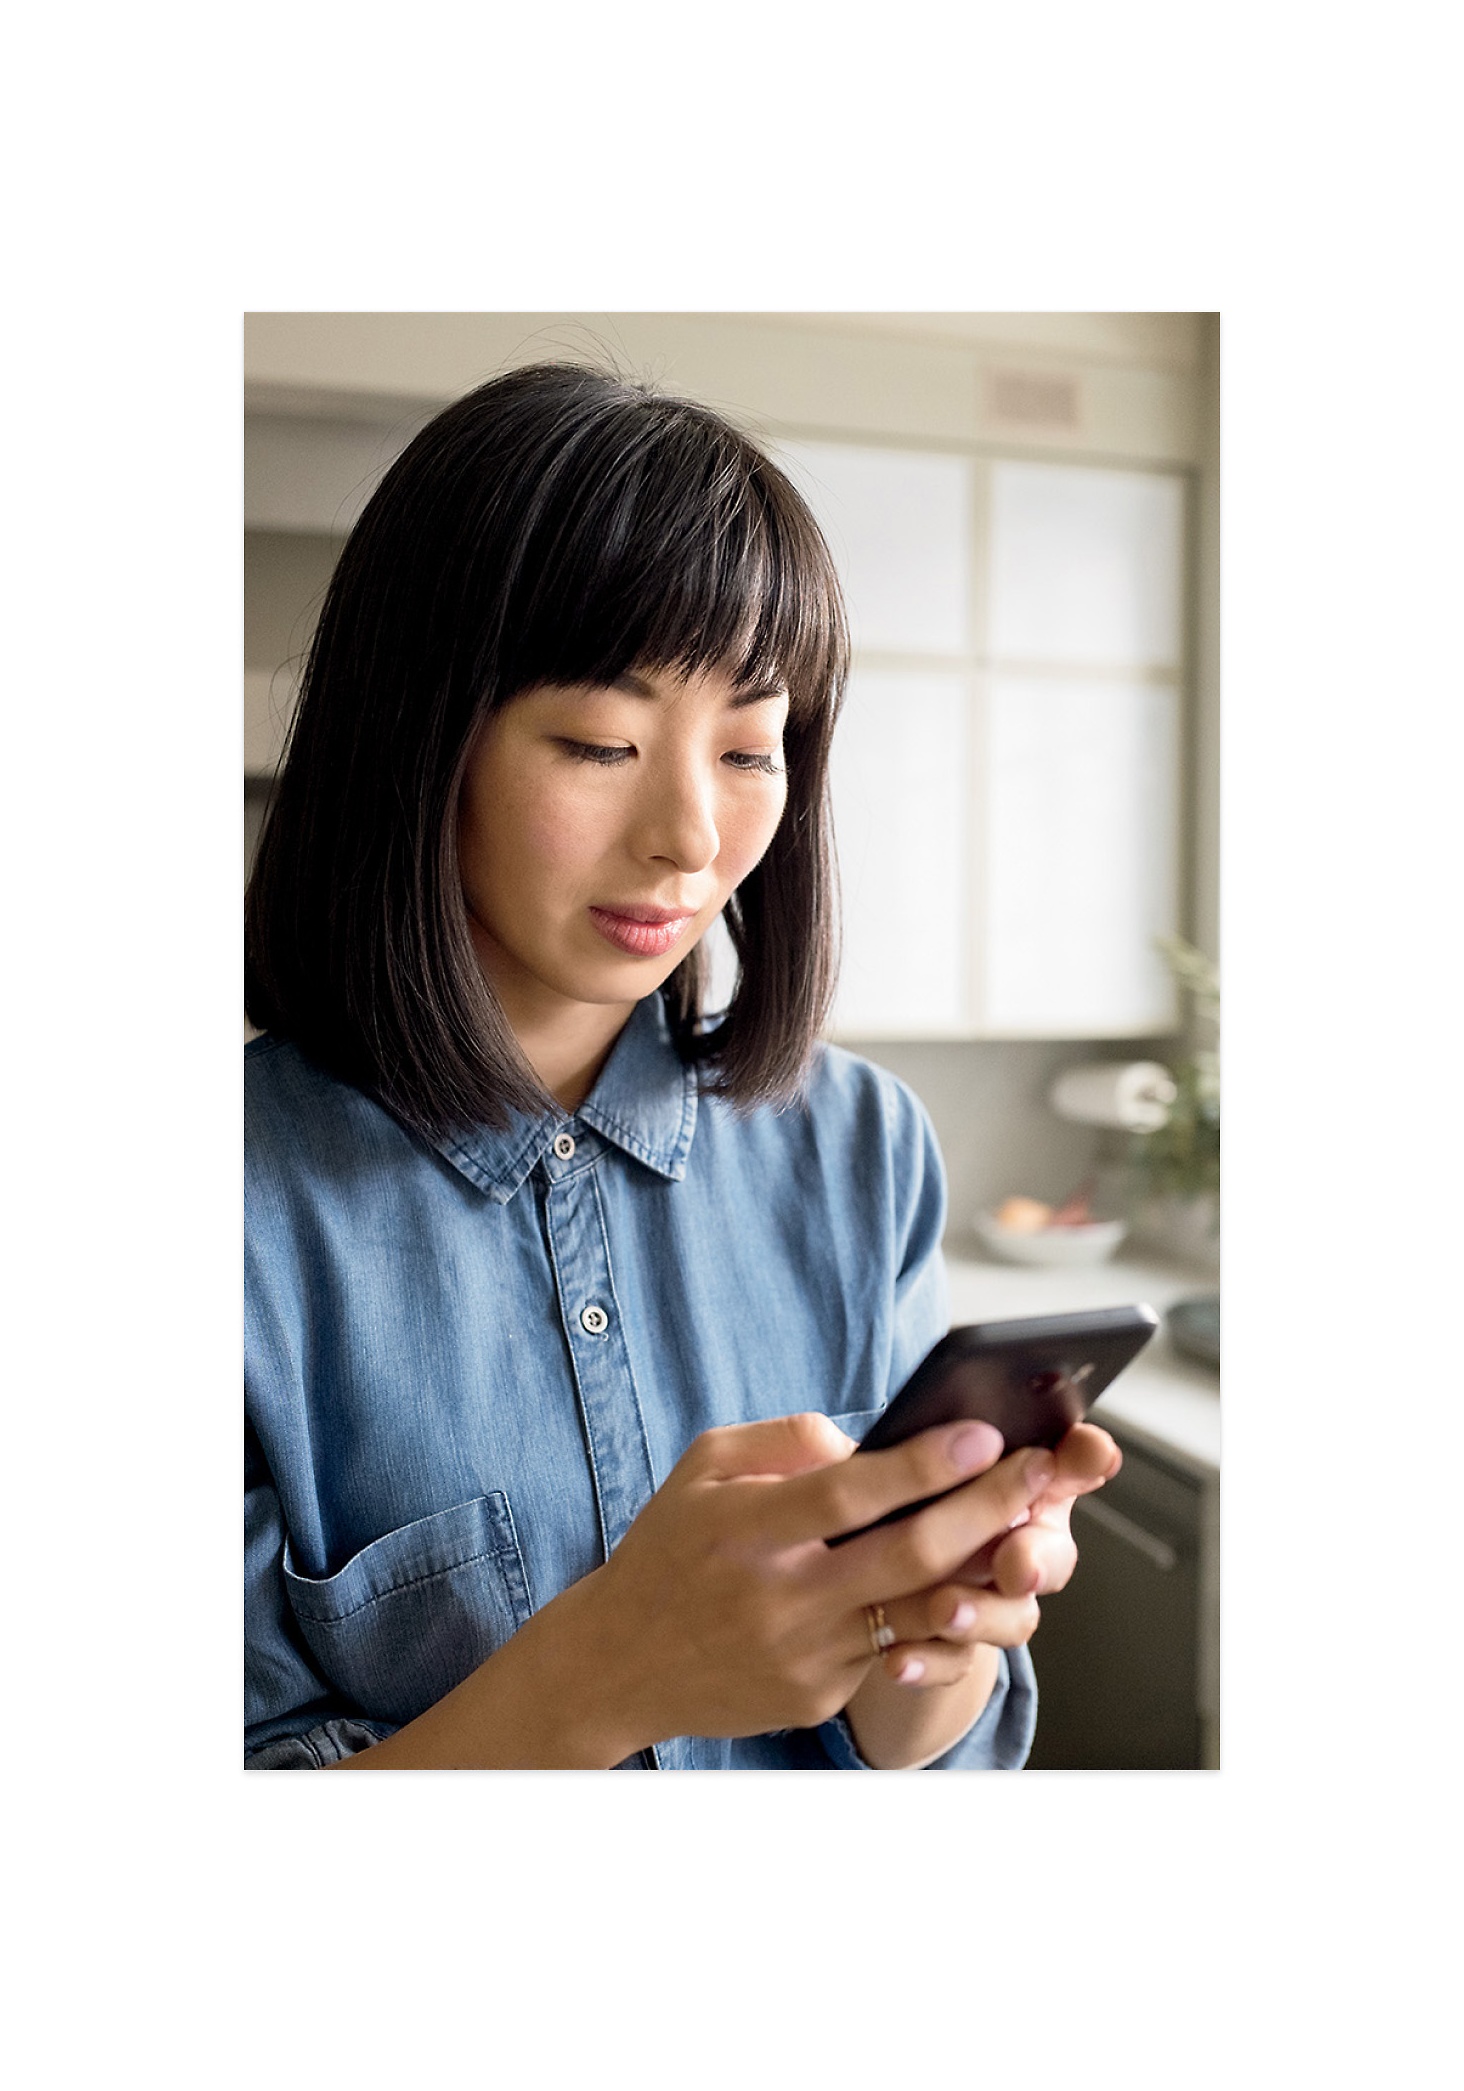 A woman wearing blue colored top checking her phone using both hands